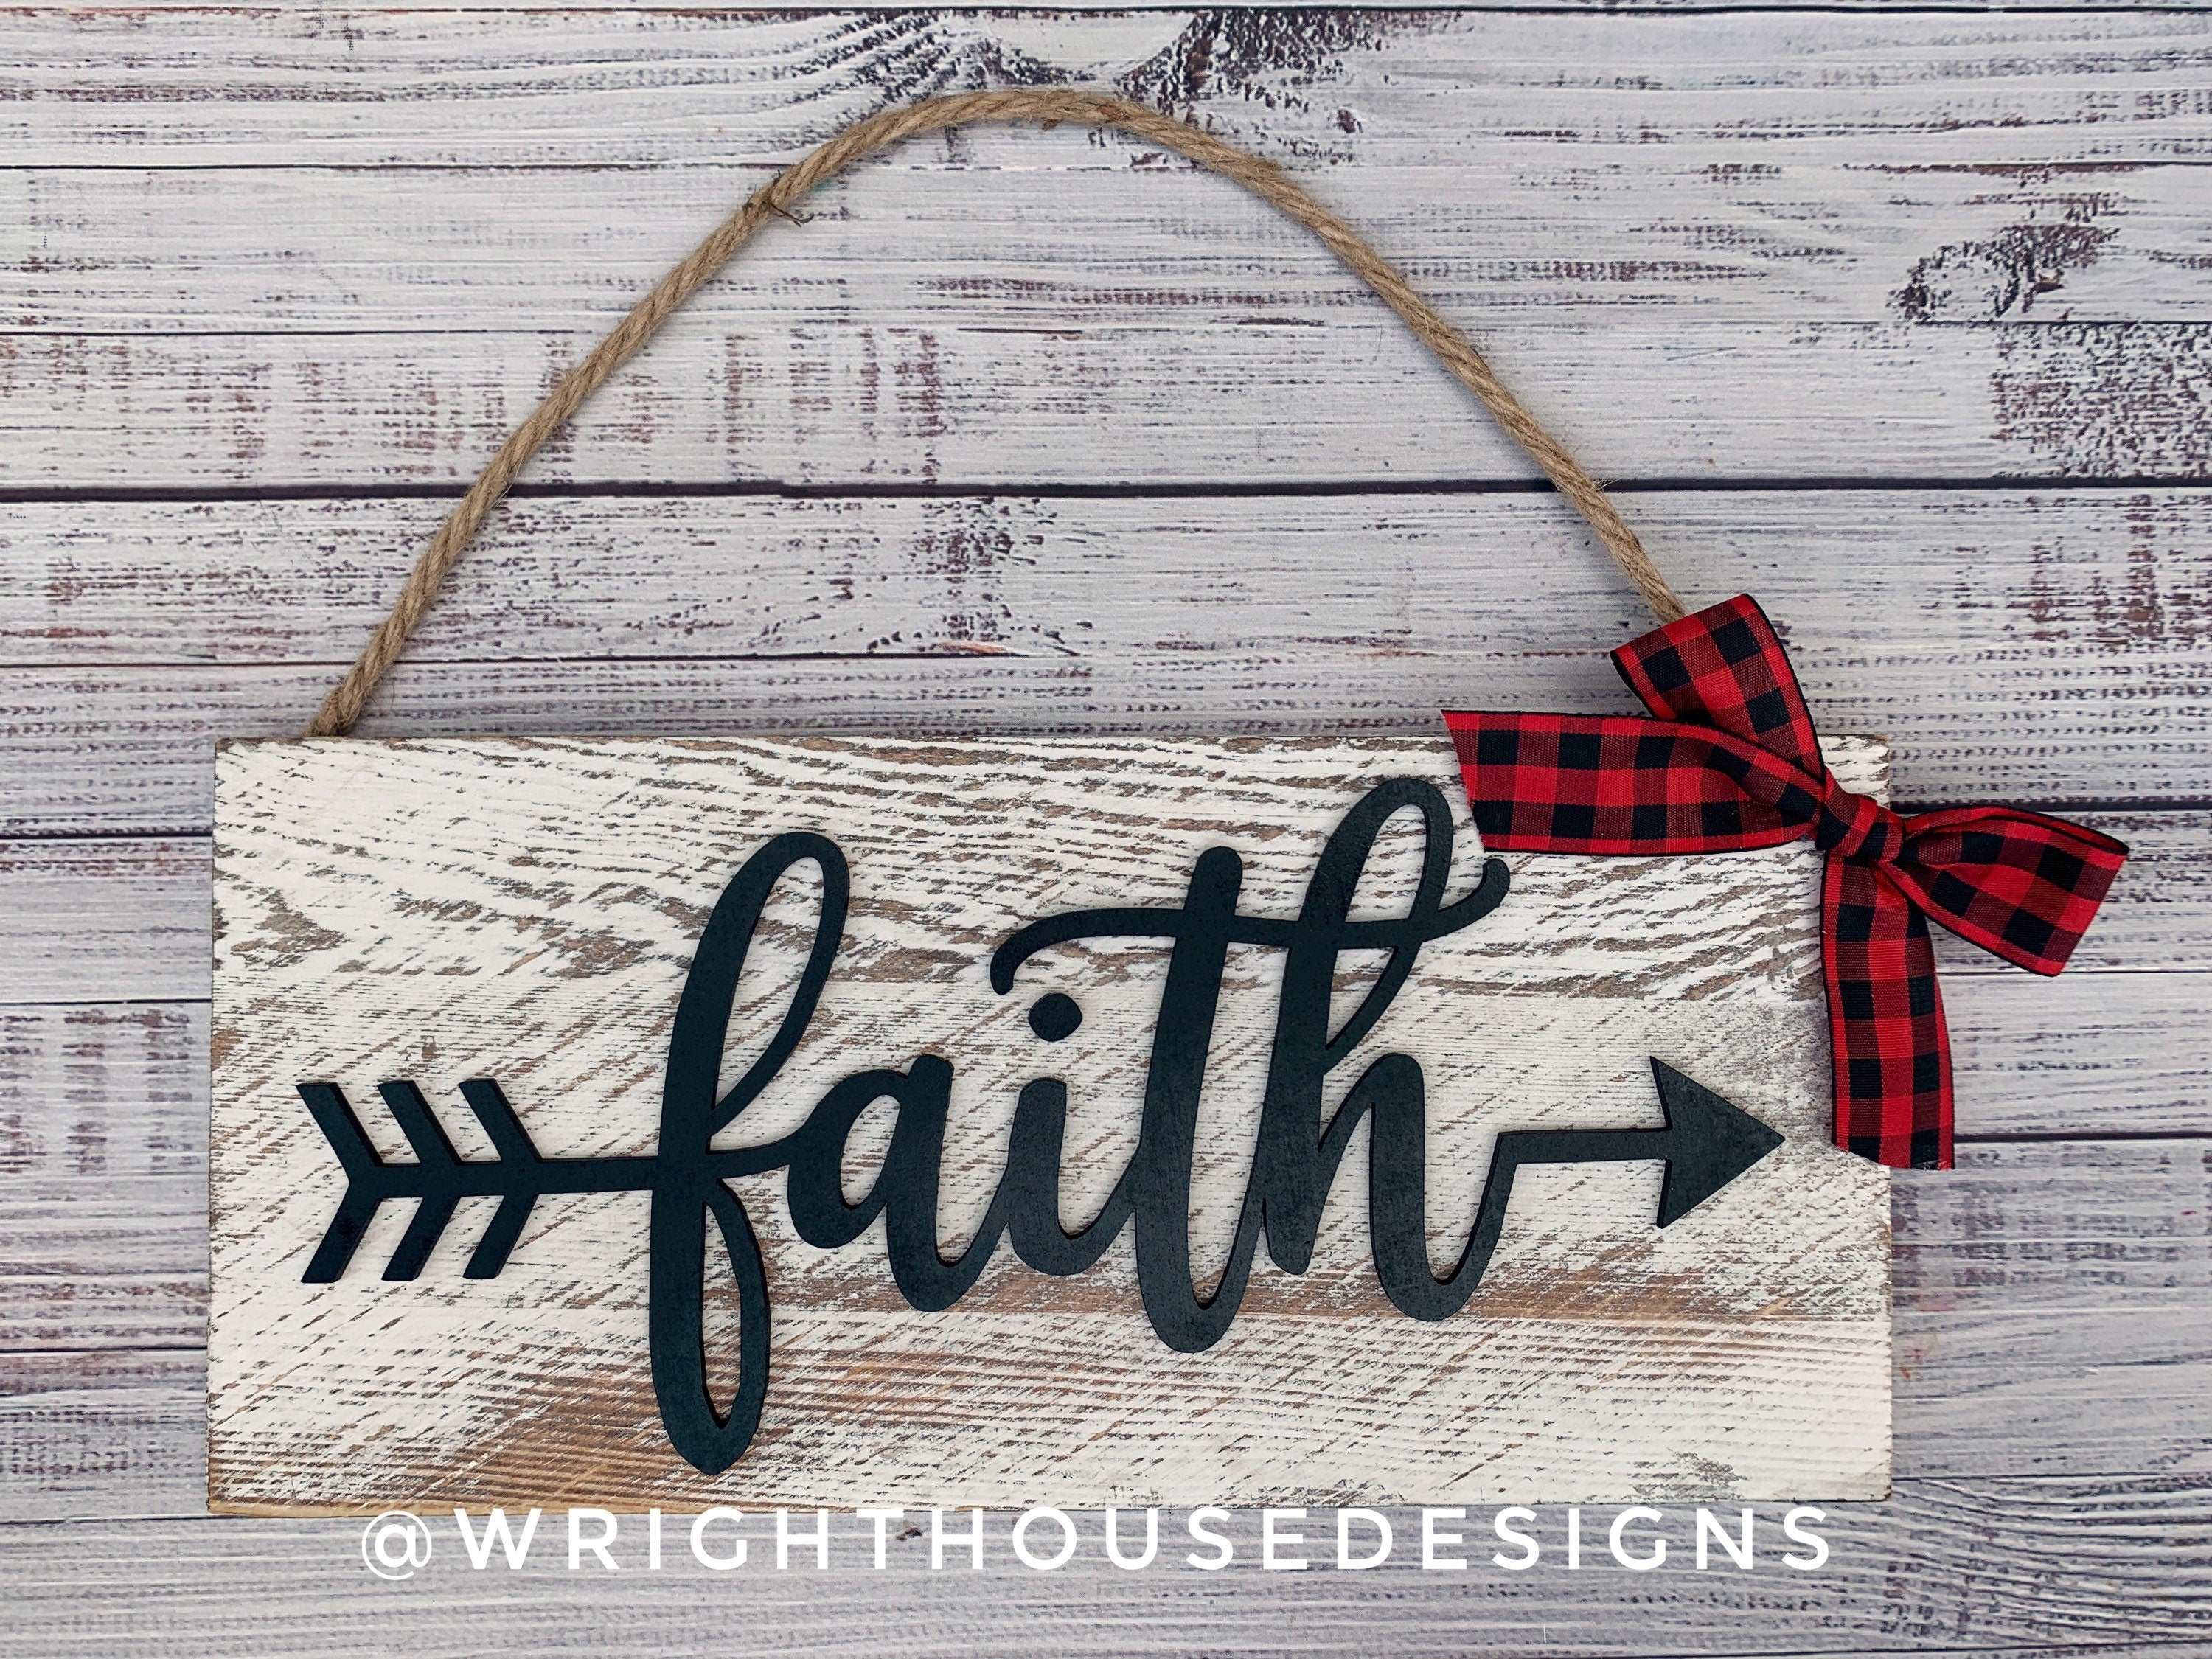 Faith Arrow Word Art - Rustic Farmhouse - Whitewash Reclaimed Wood Plank Board Sign - Wooden Wall Art - Home Decor and She Shed Signs